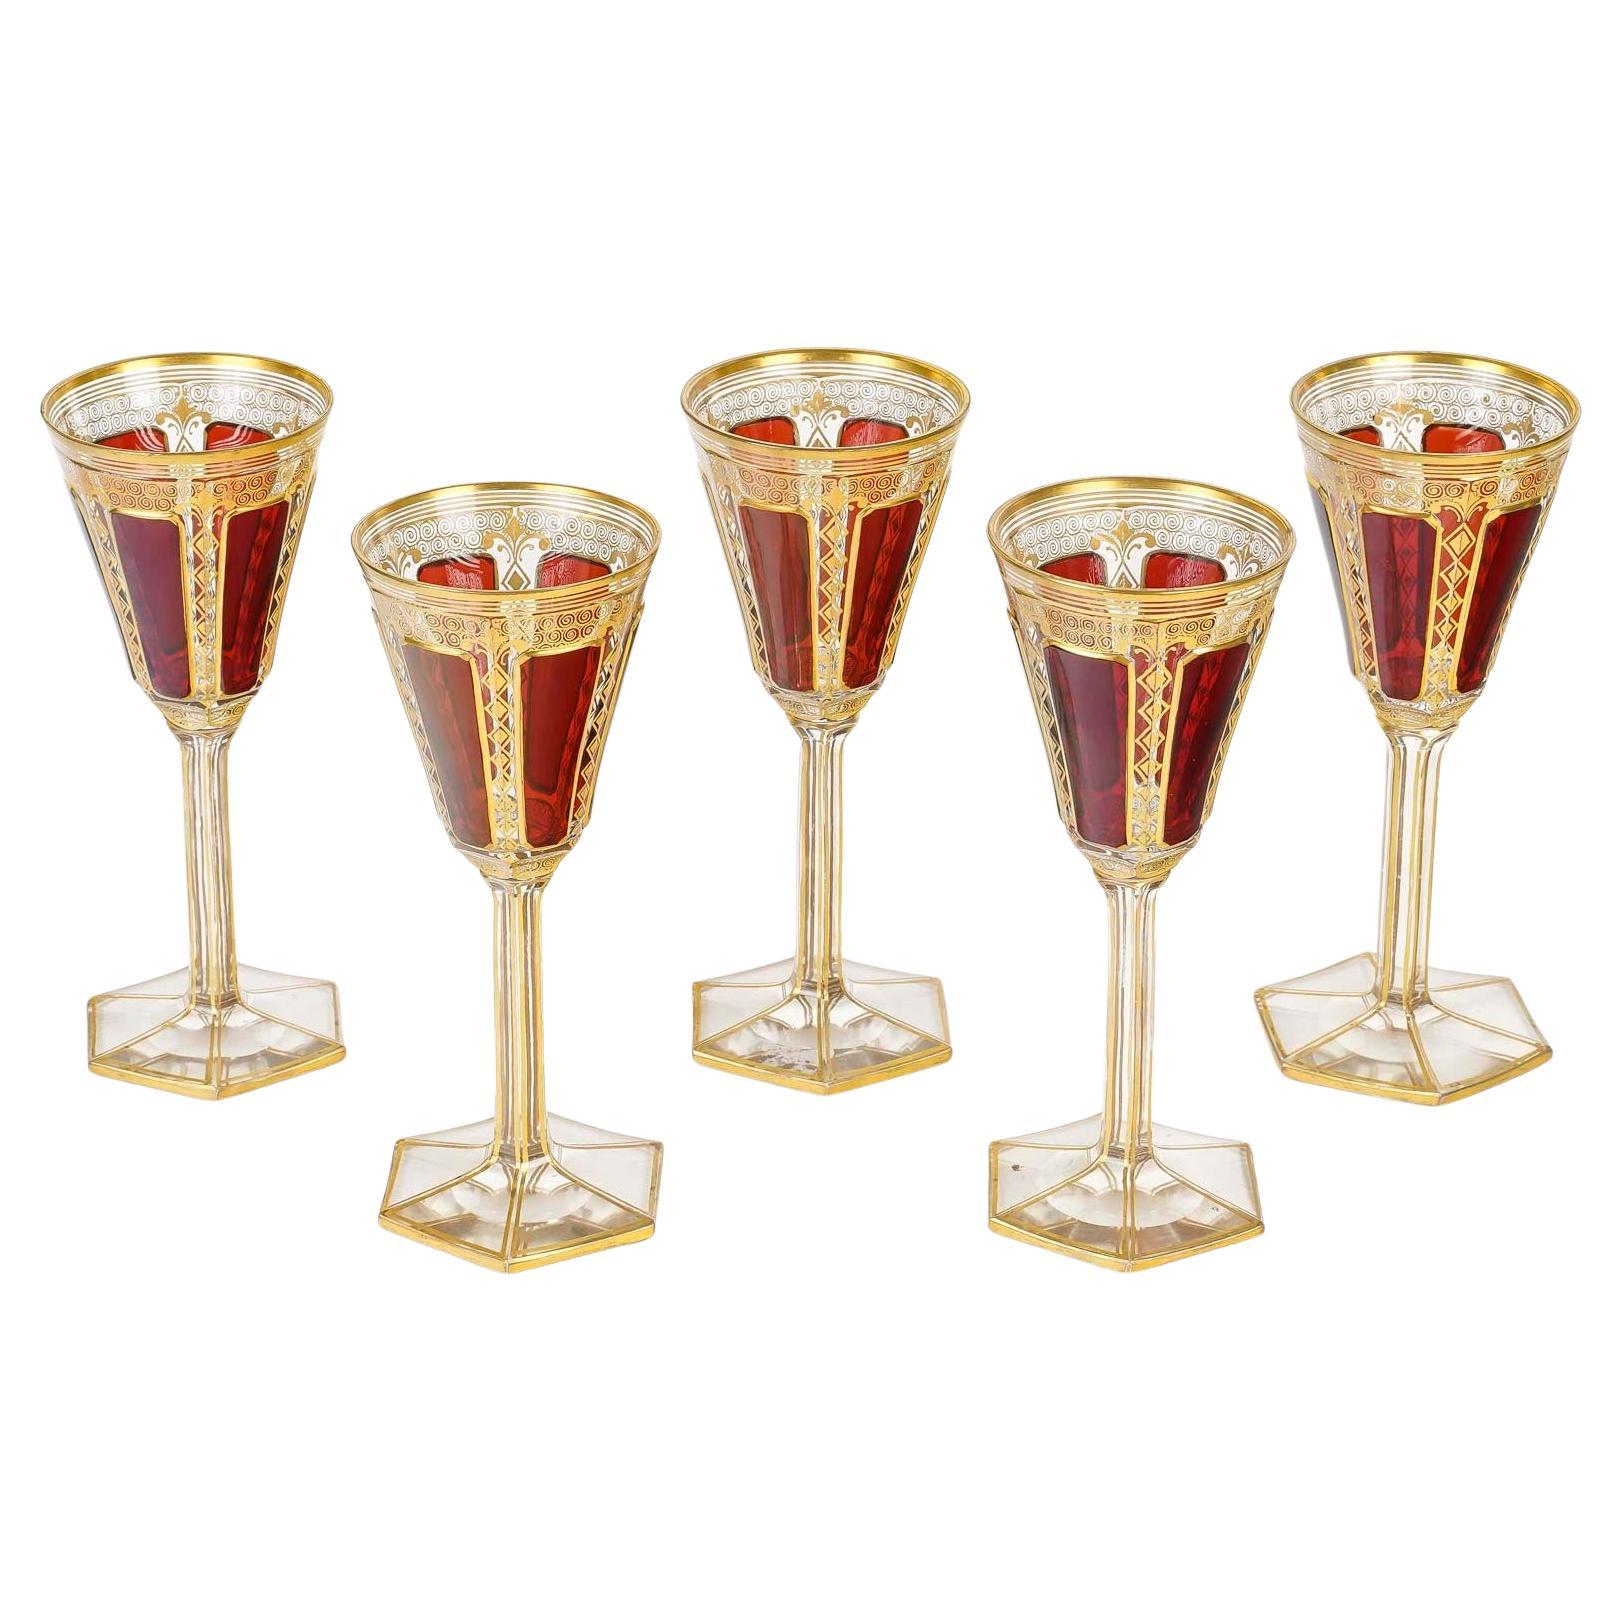 5 Bohemian Crystal Glasses, Red Cabochon, 19th Century, Napoleon III Period. For Sale